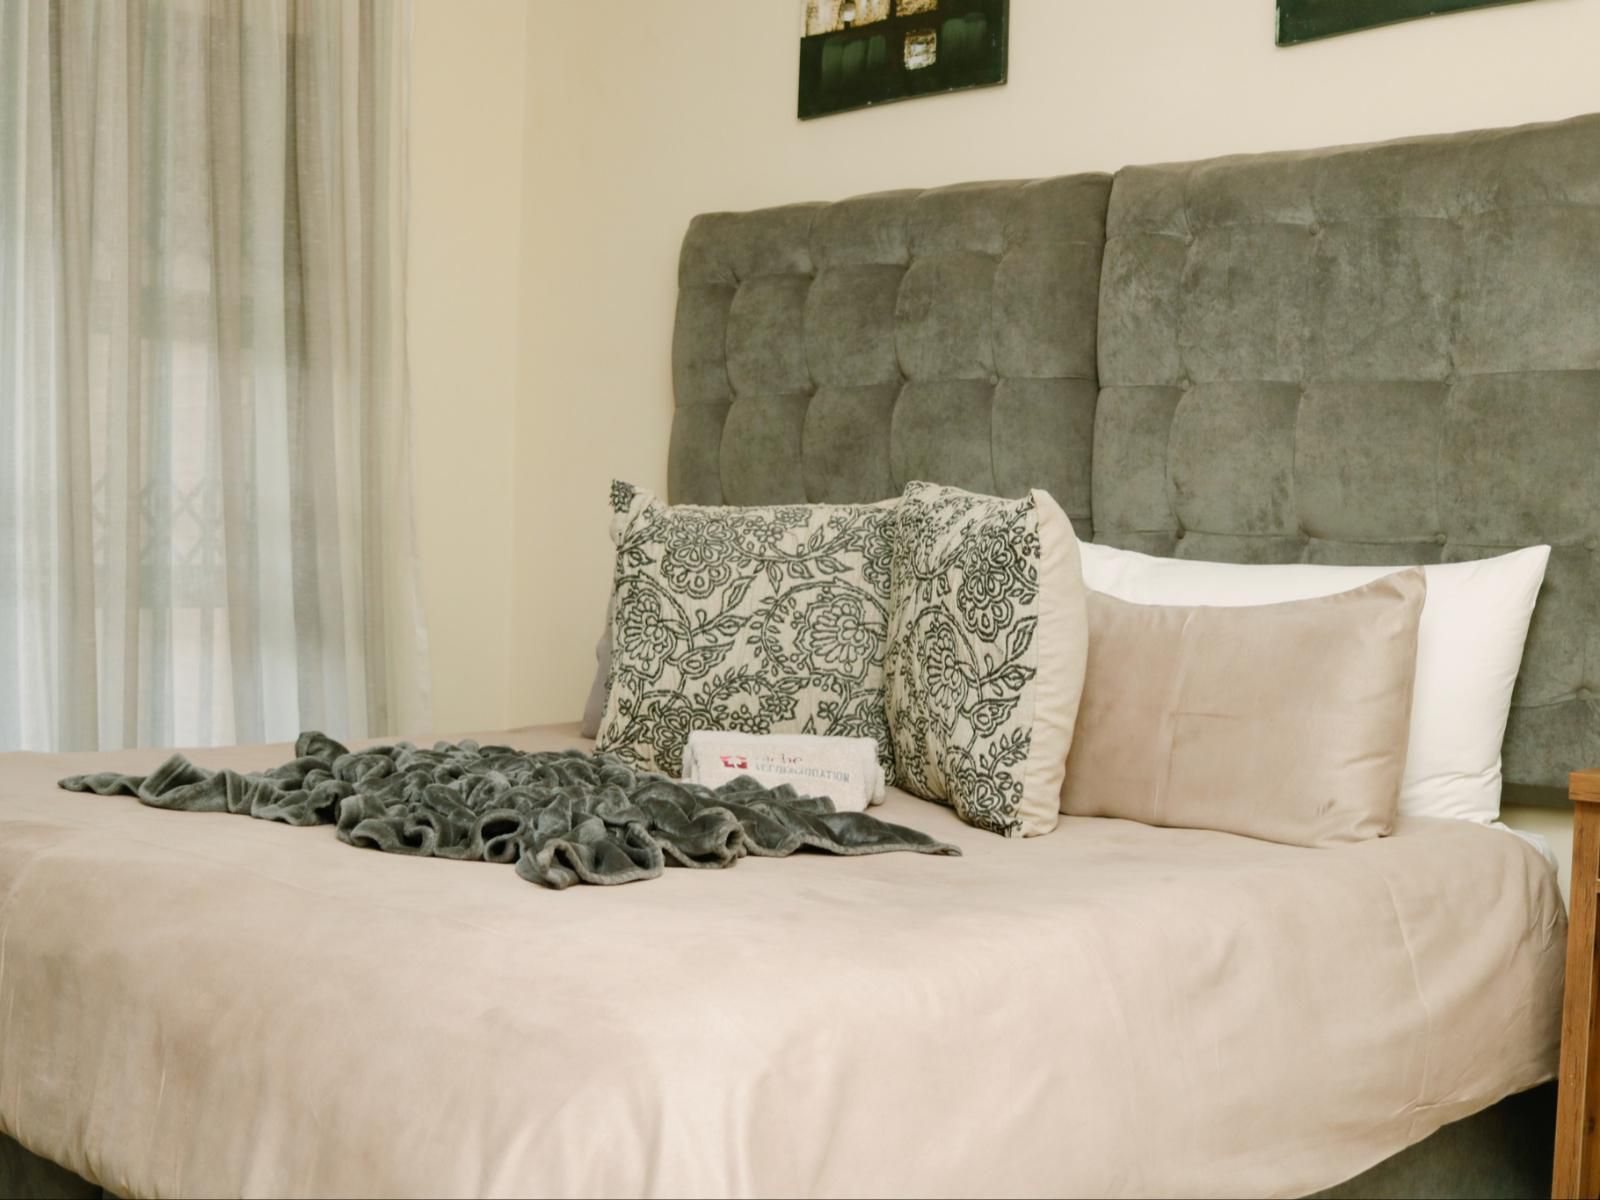 Sunset Events And Accommodation Summerstrand Port Elizabeth Eastern Cape South Africa Sepia Tones, Bedroom